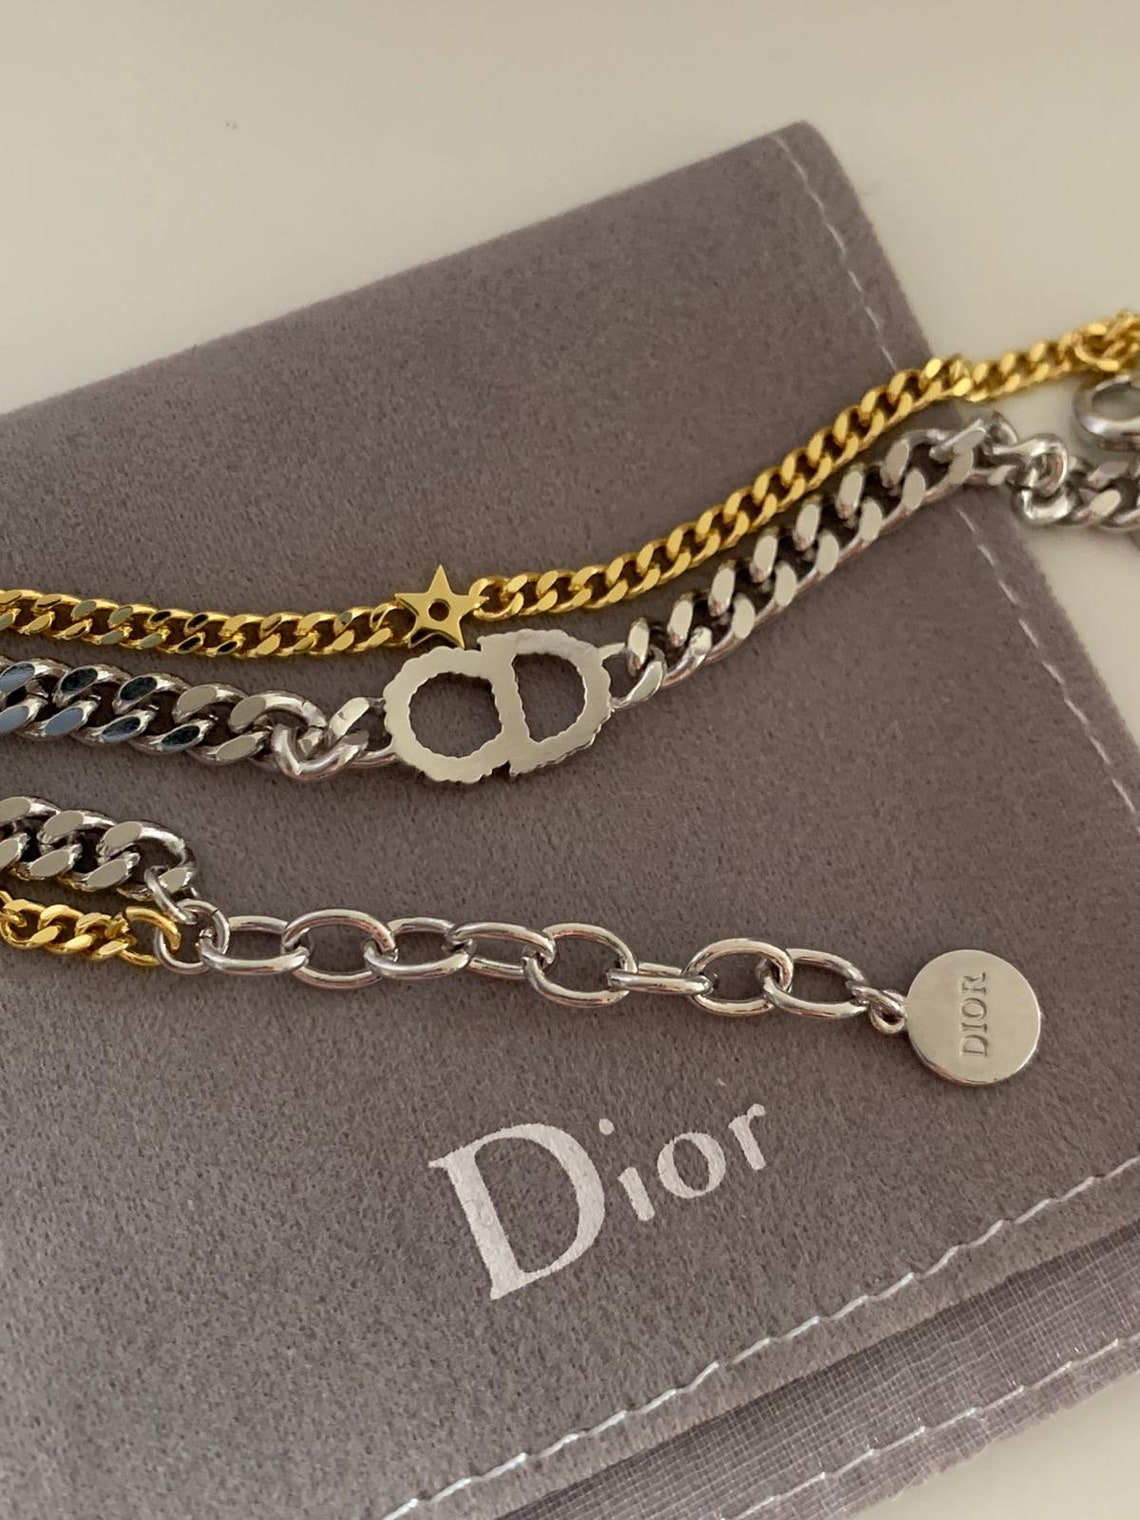 CD Dior Clair D Lune Double Bracelet Gold and Silver | Etsy